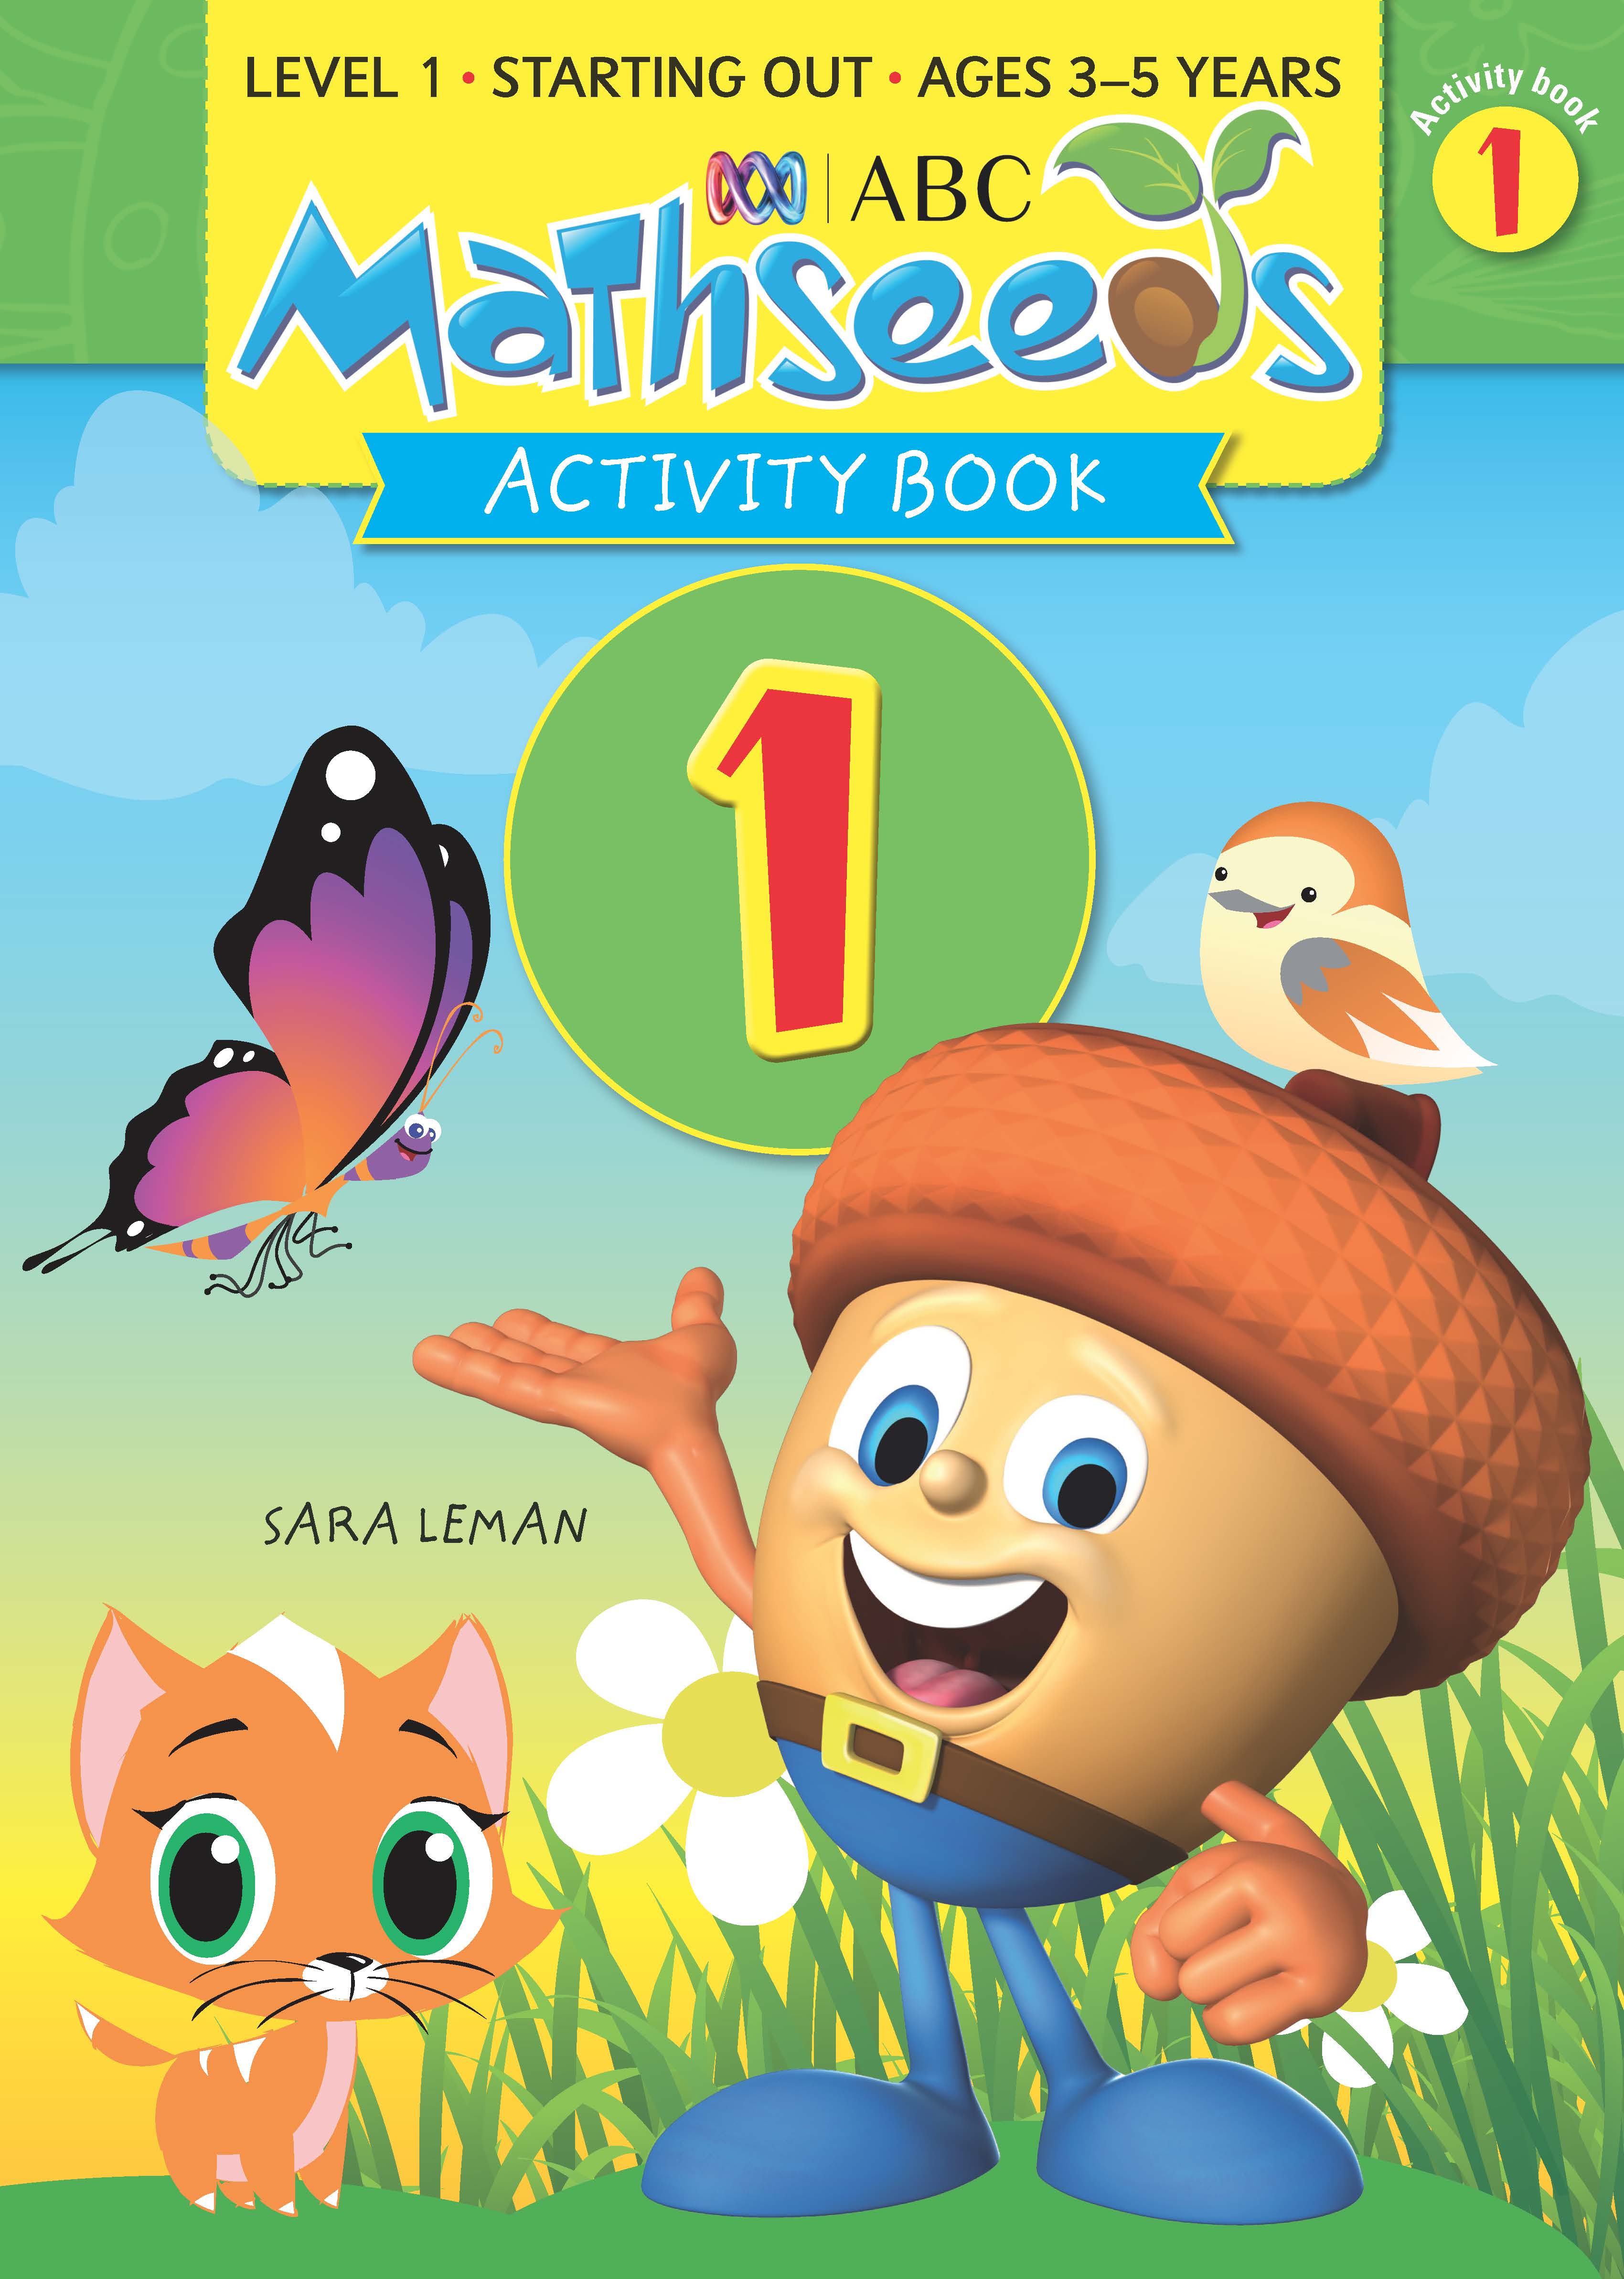 Picture of ABC Mathseeds Activity Book 1 Level 1 Ages 3-5